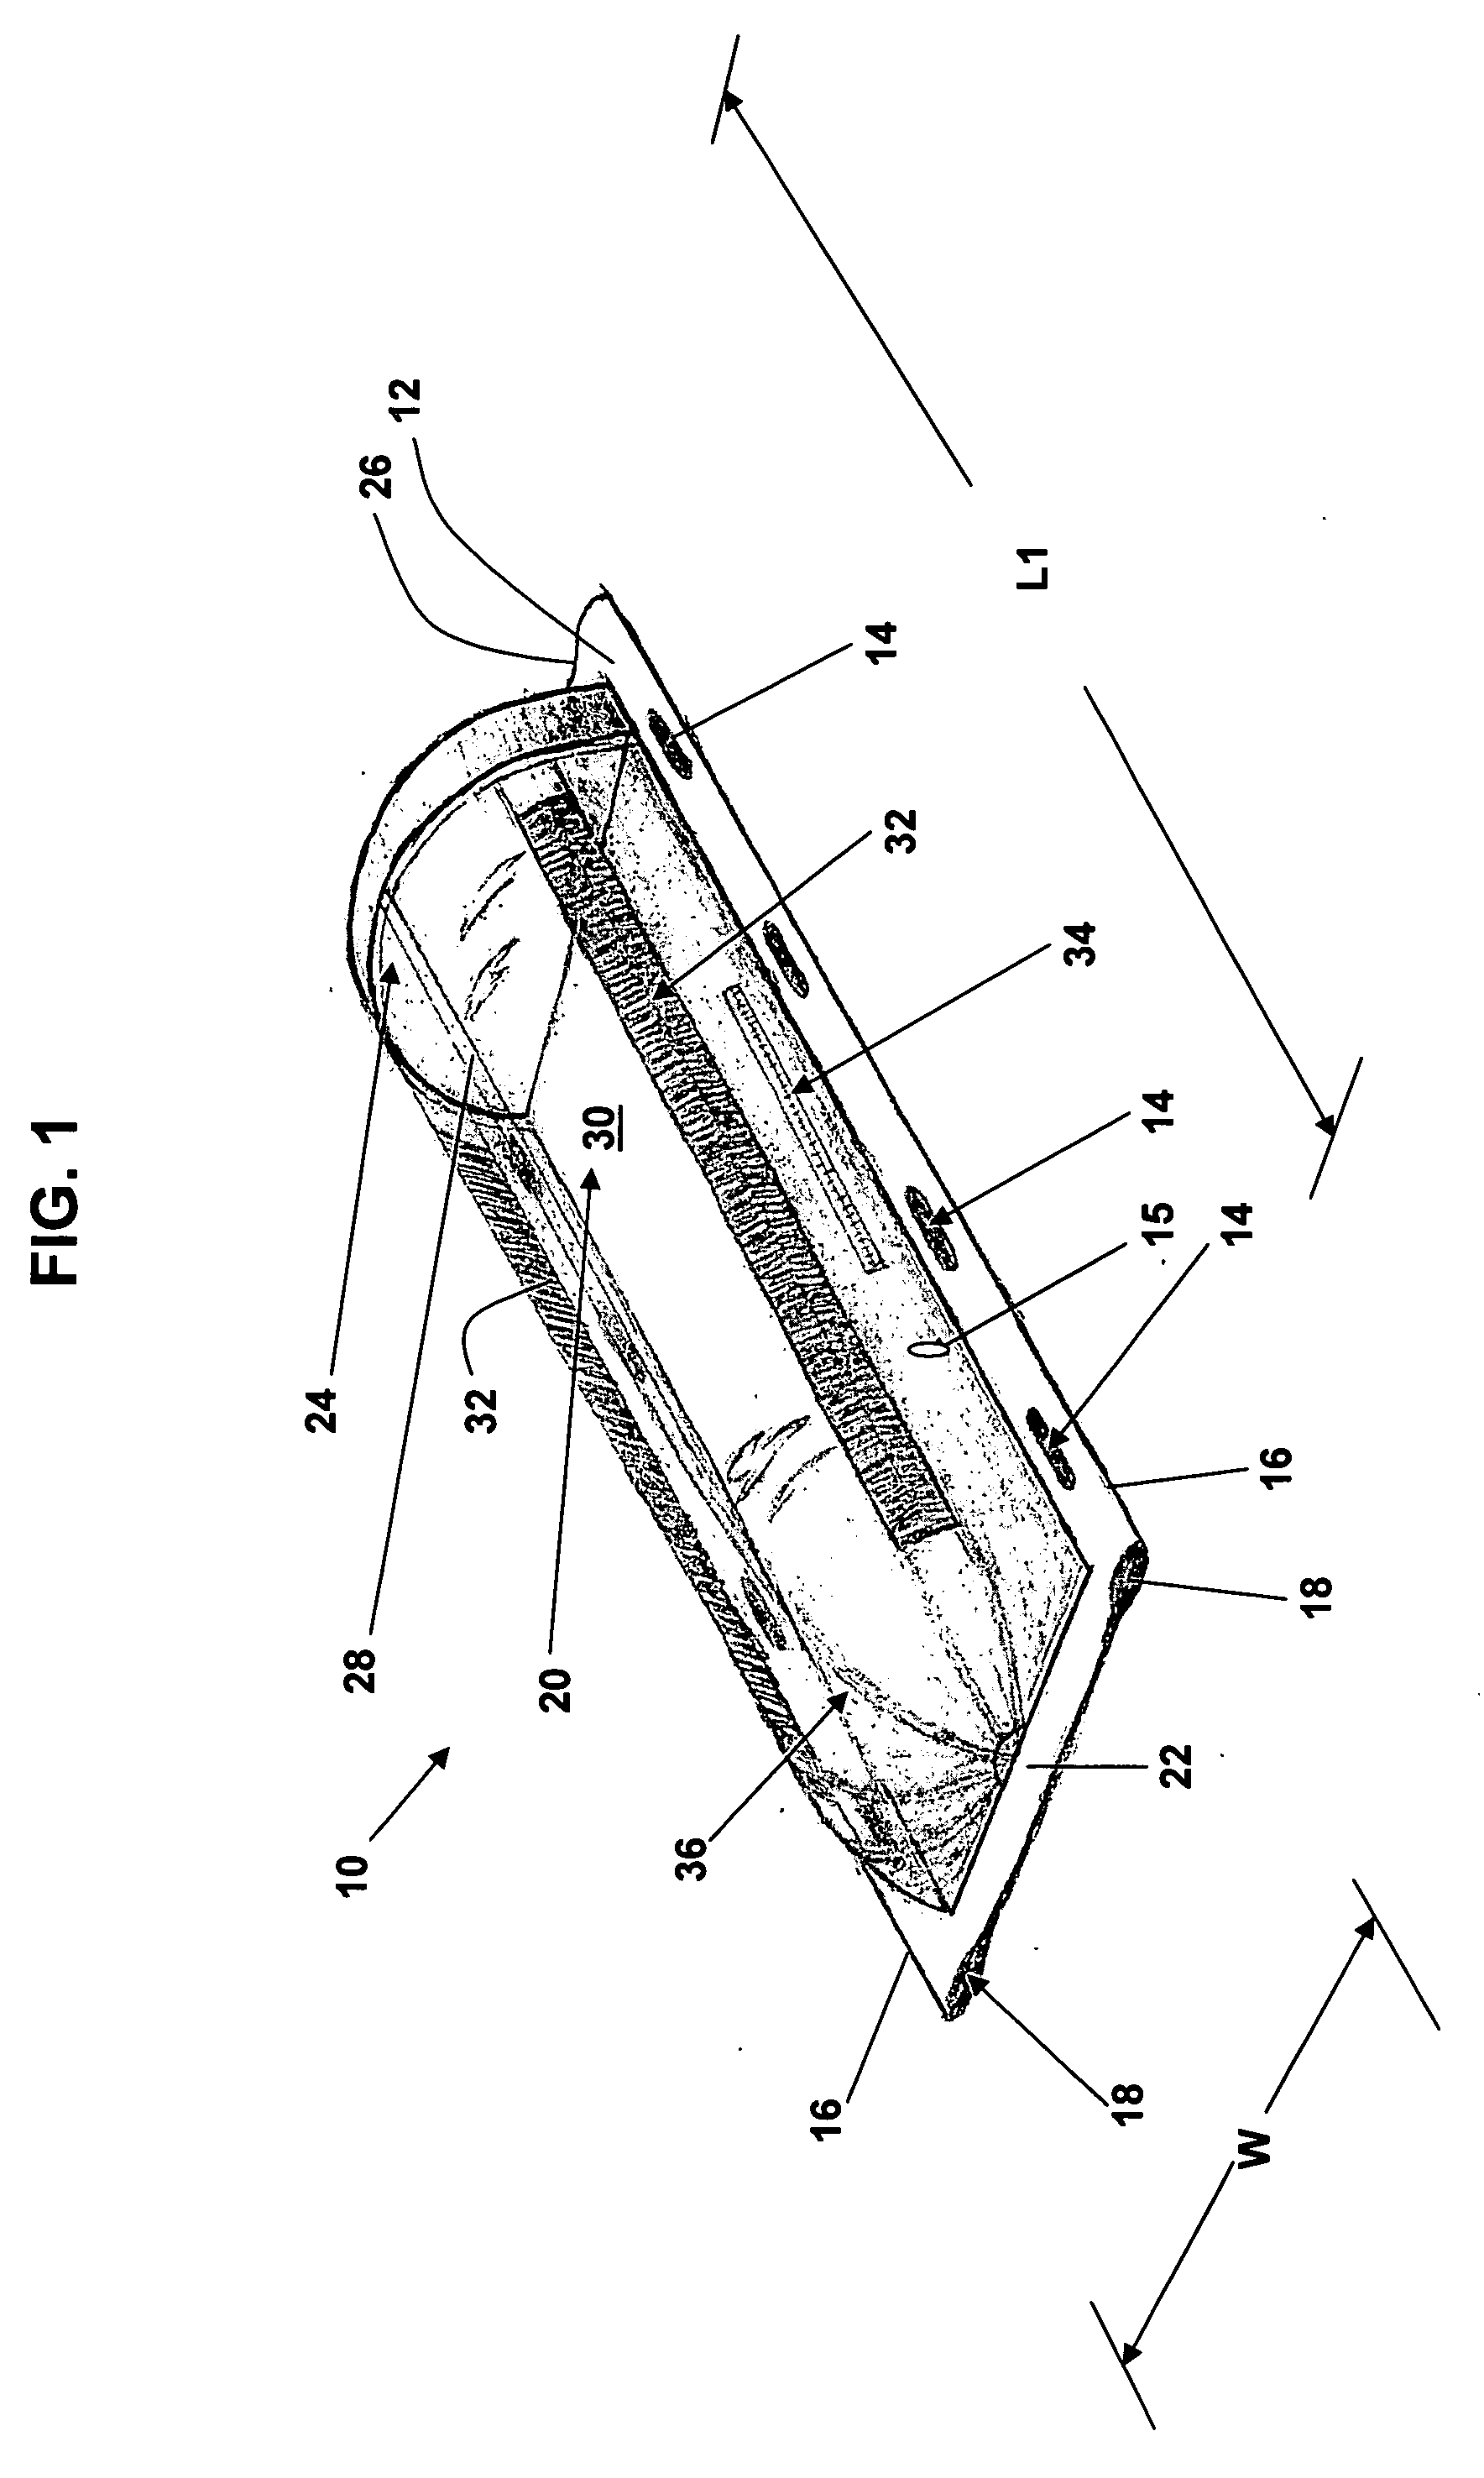 Apparatus and method for providing continuous access to an isolation space while maintaining isolation